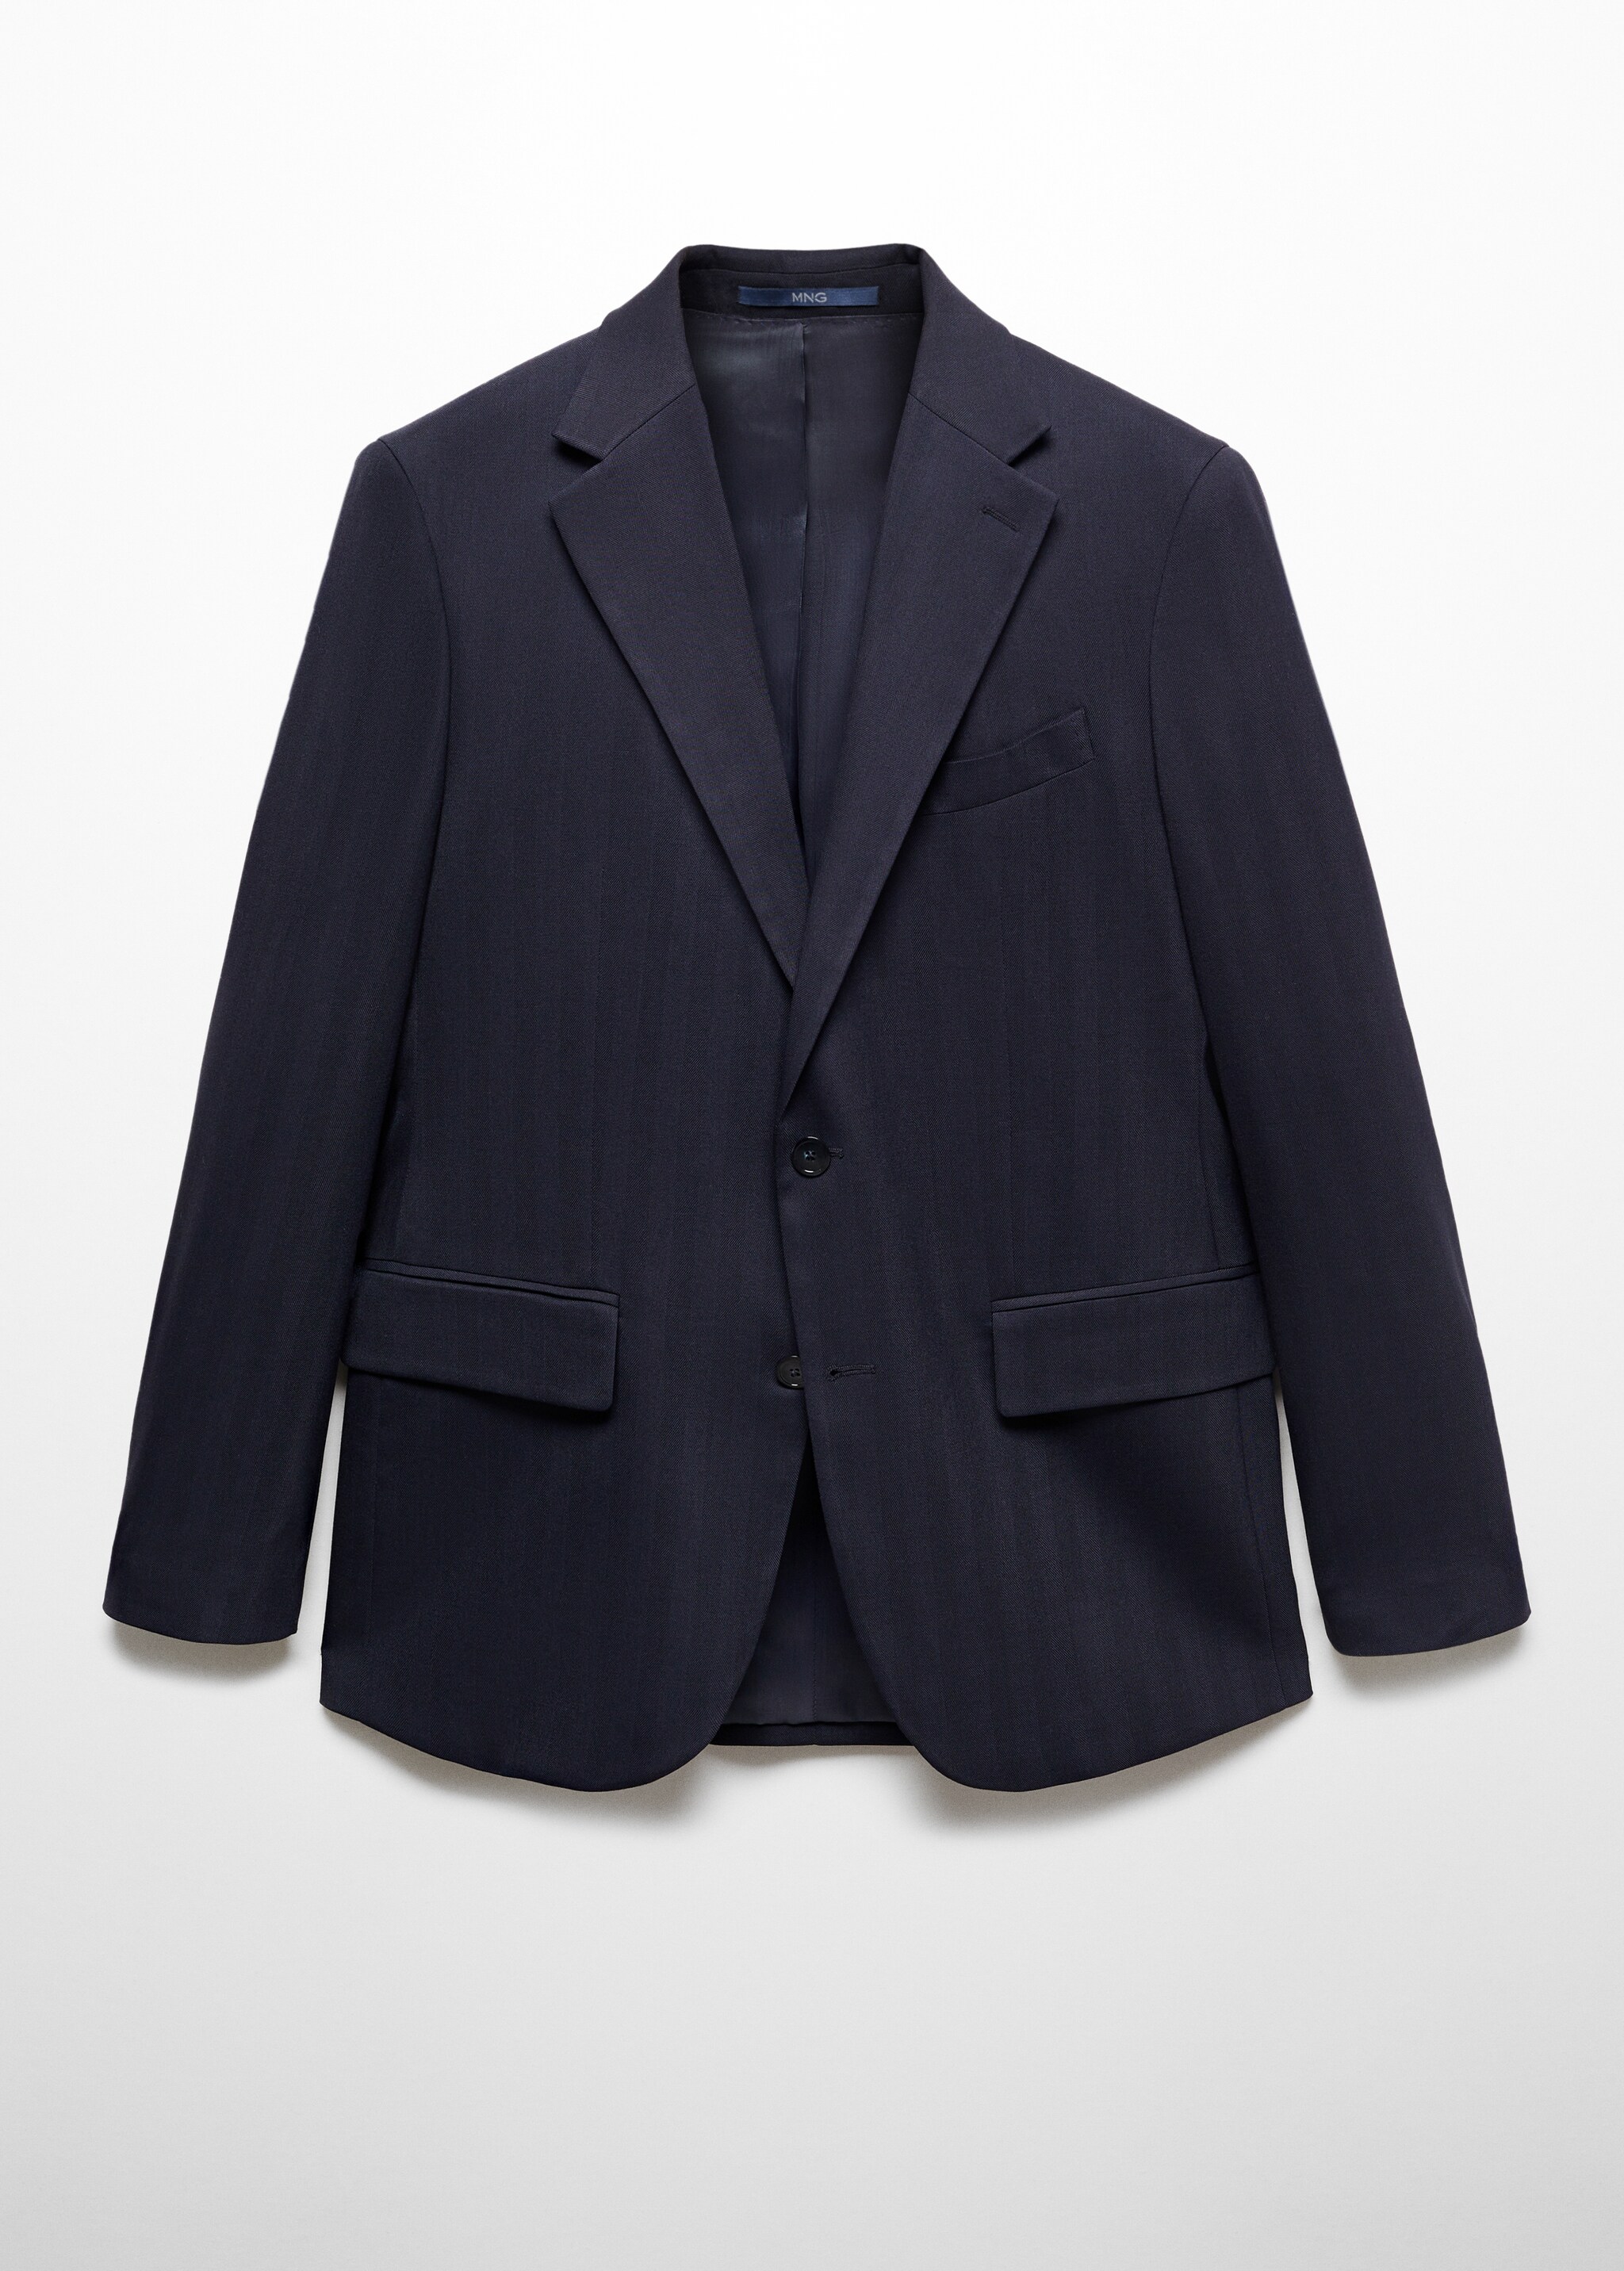 Slim fit cold wool herringbone suit jacket - Article without model